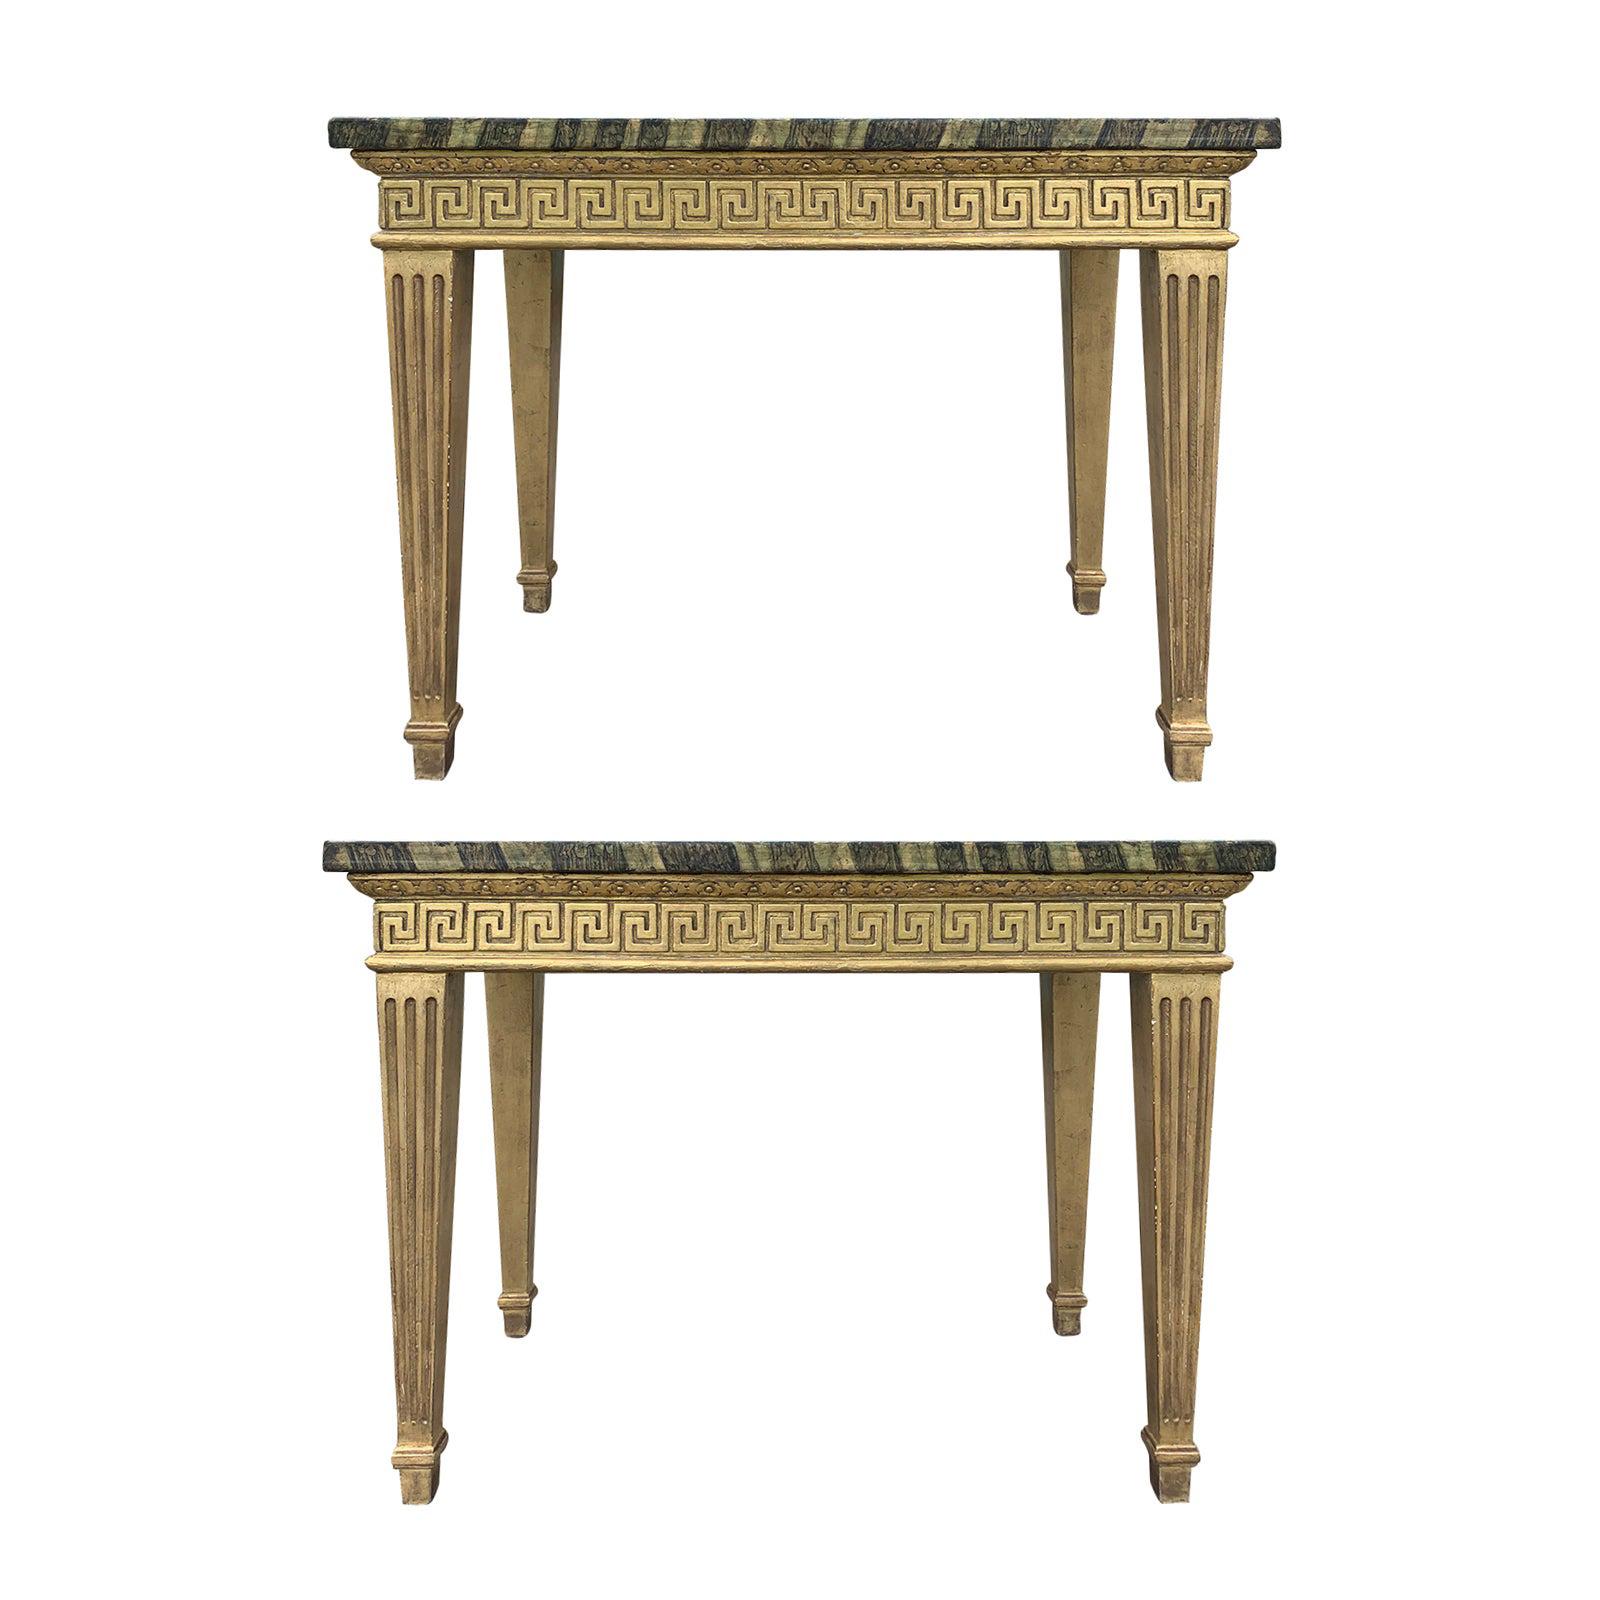 Pair of 18th Century Continental Giltwood Consoles, Greek Key Freize, Fluted Leg